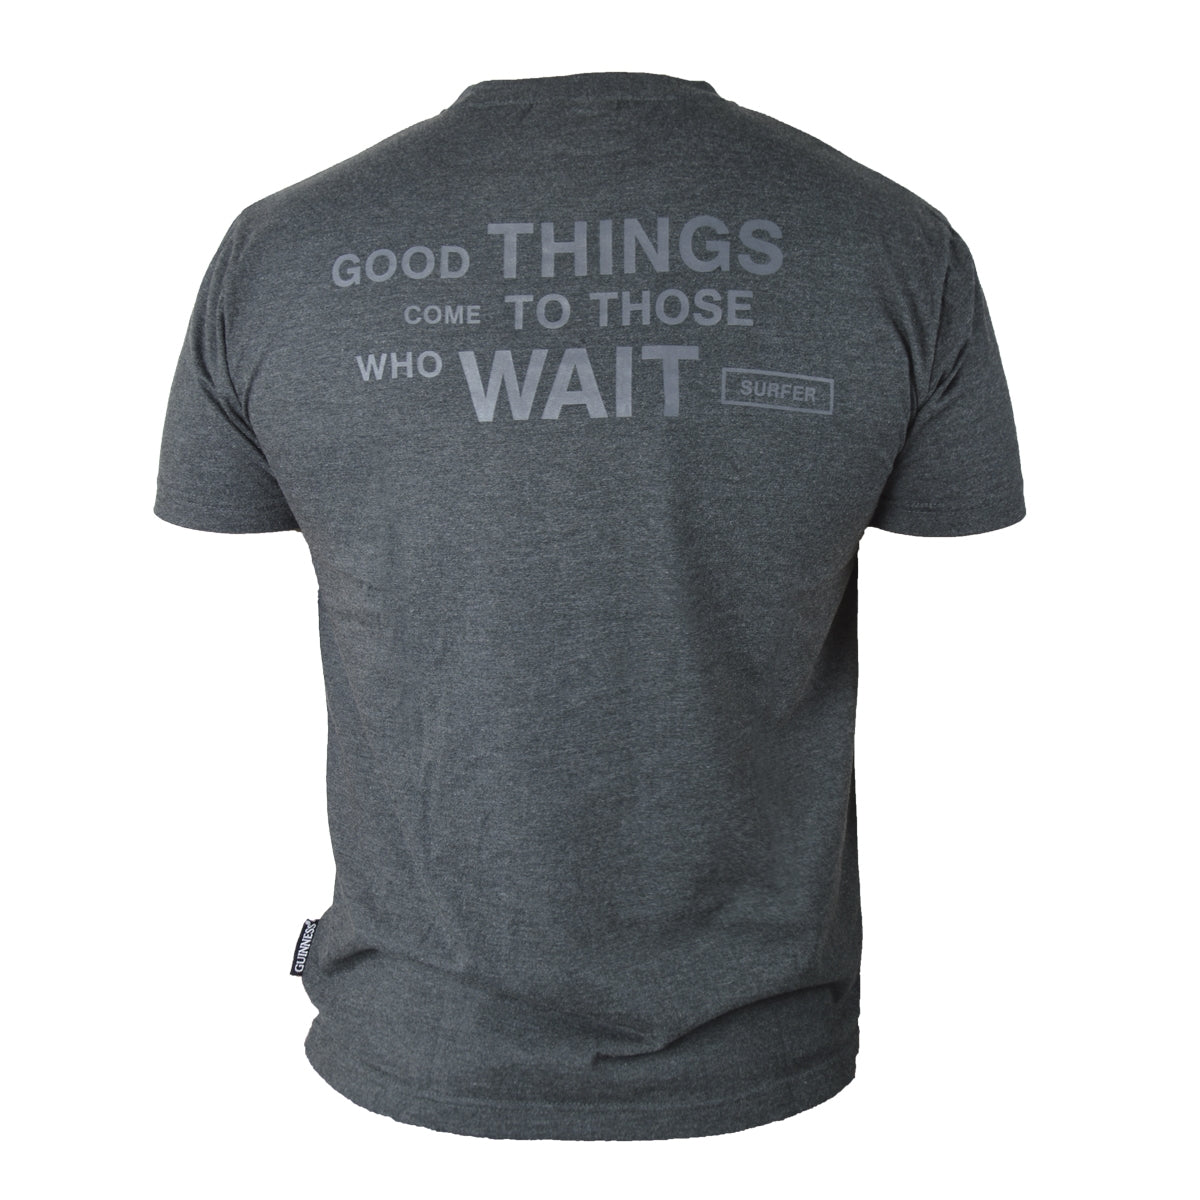 A durable Guinness Surf Tee made from a cotton blend fabric that says "Good things come to those who wait.